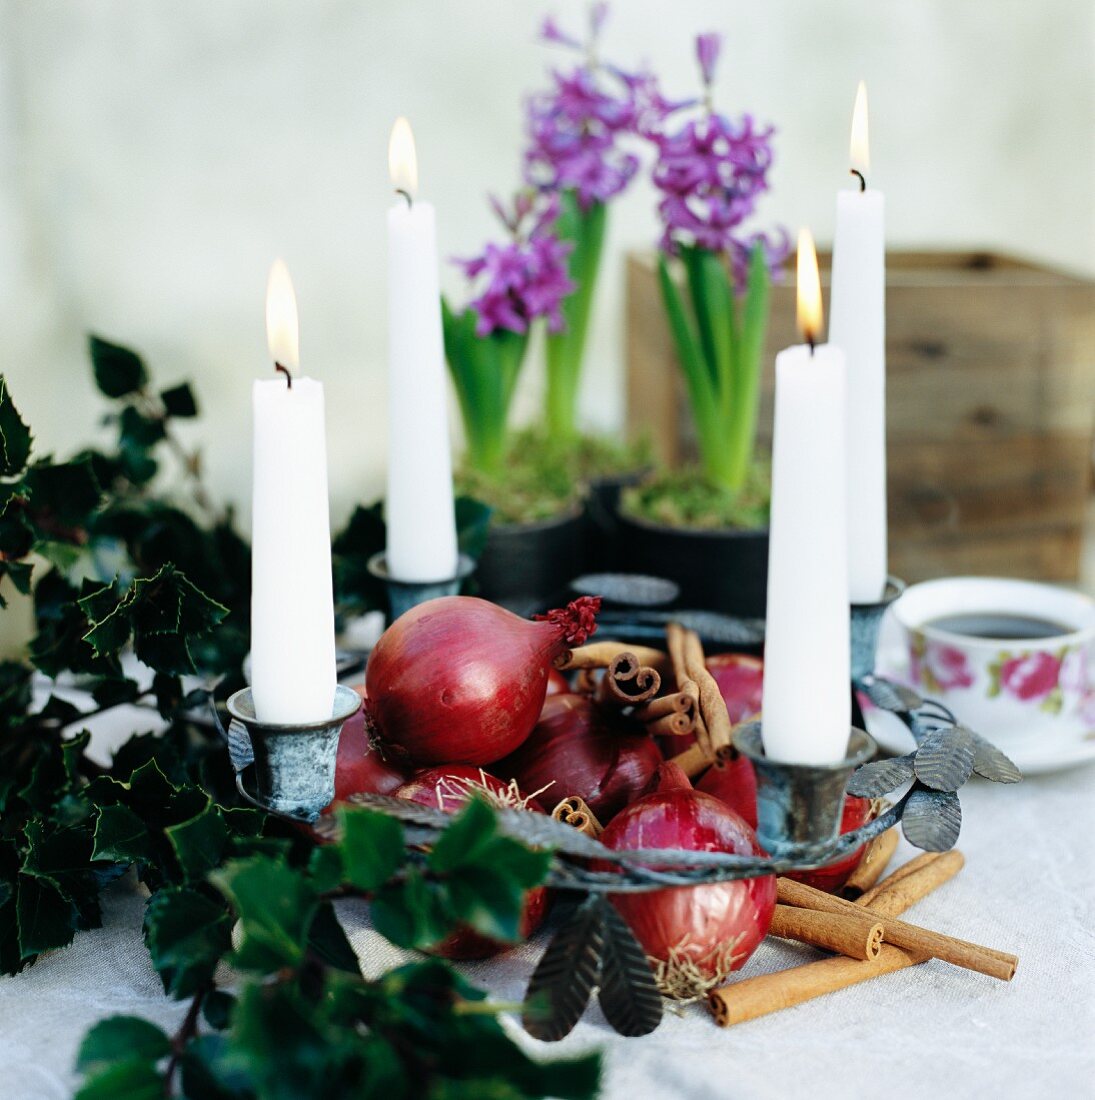 Advent wreath decorated with four burning candles, red onions and cinnamon sticks